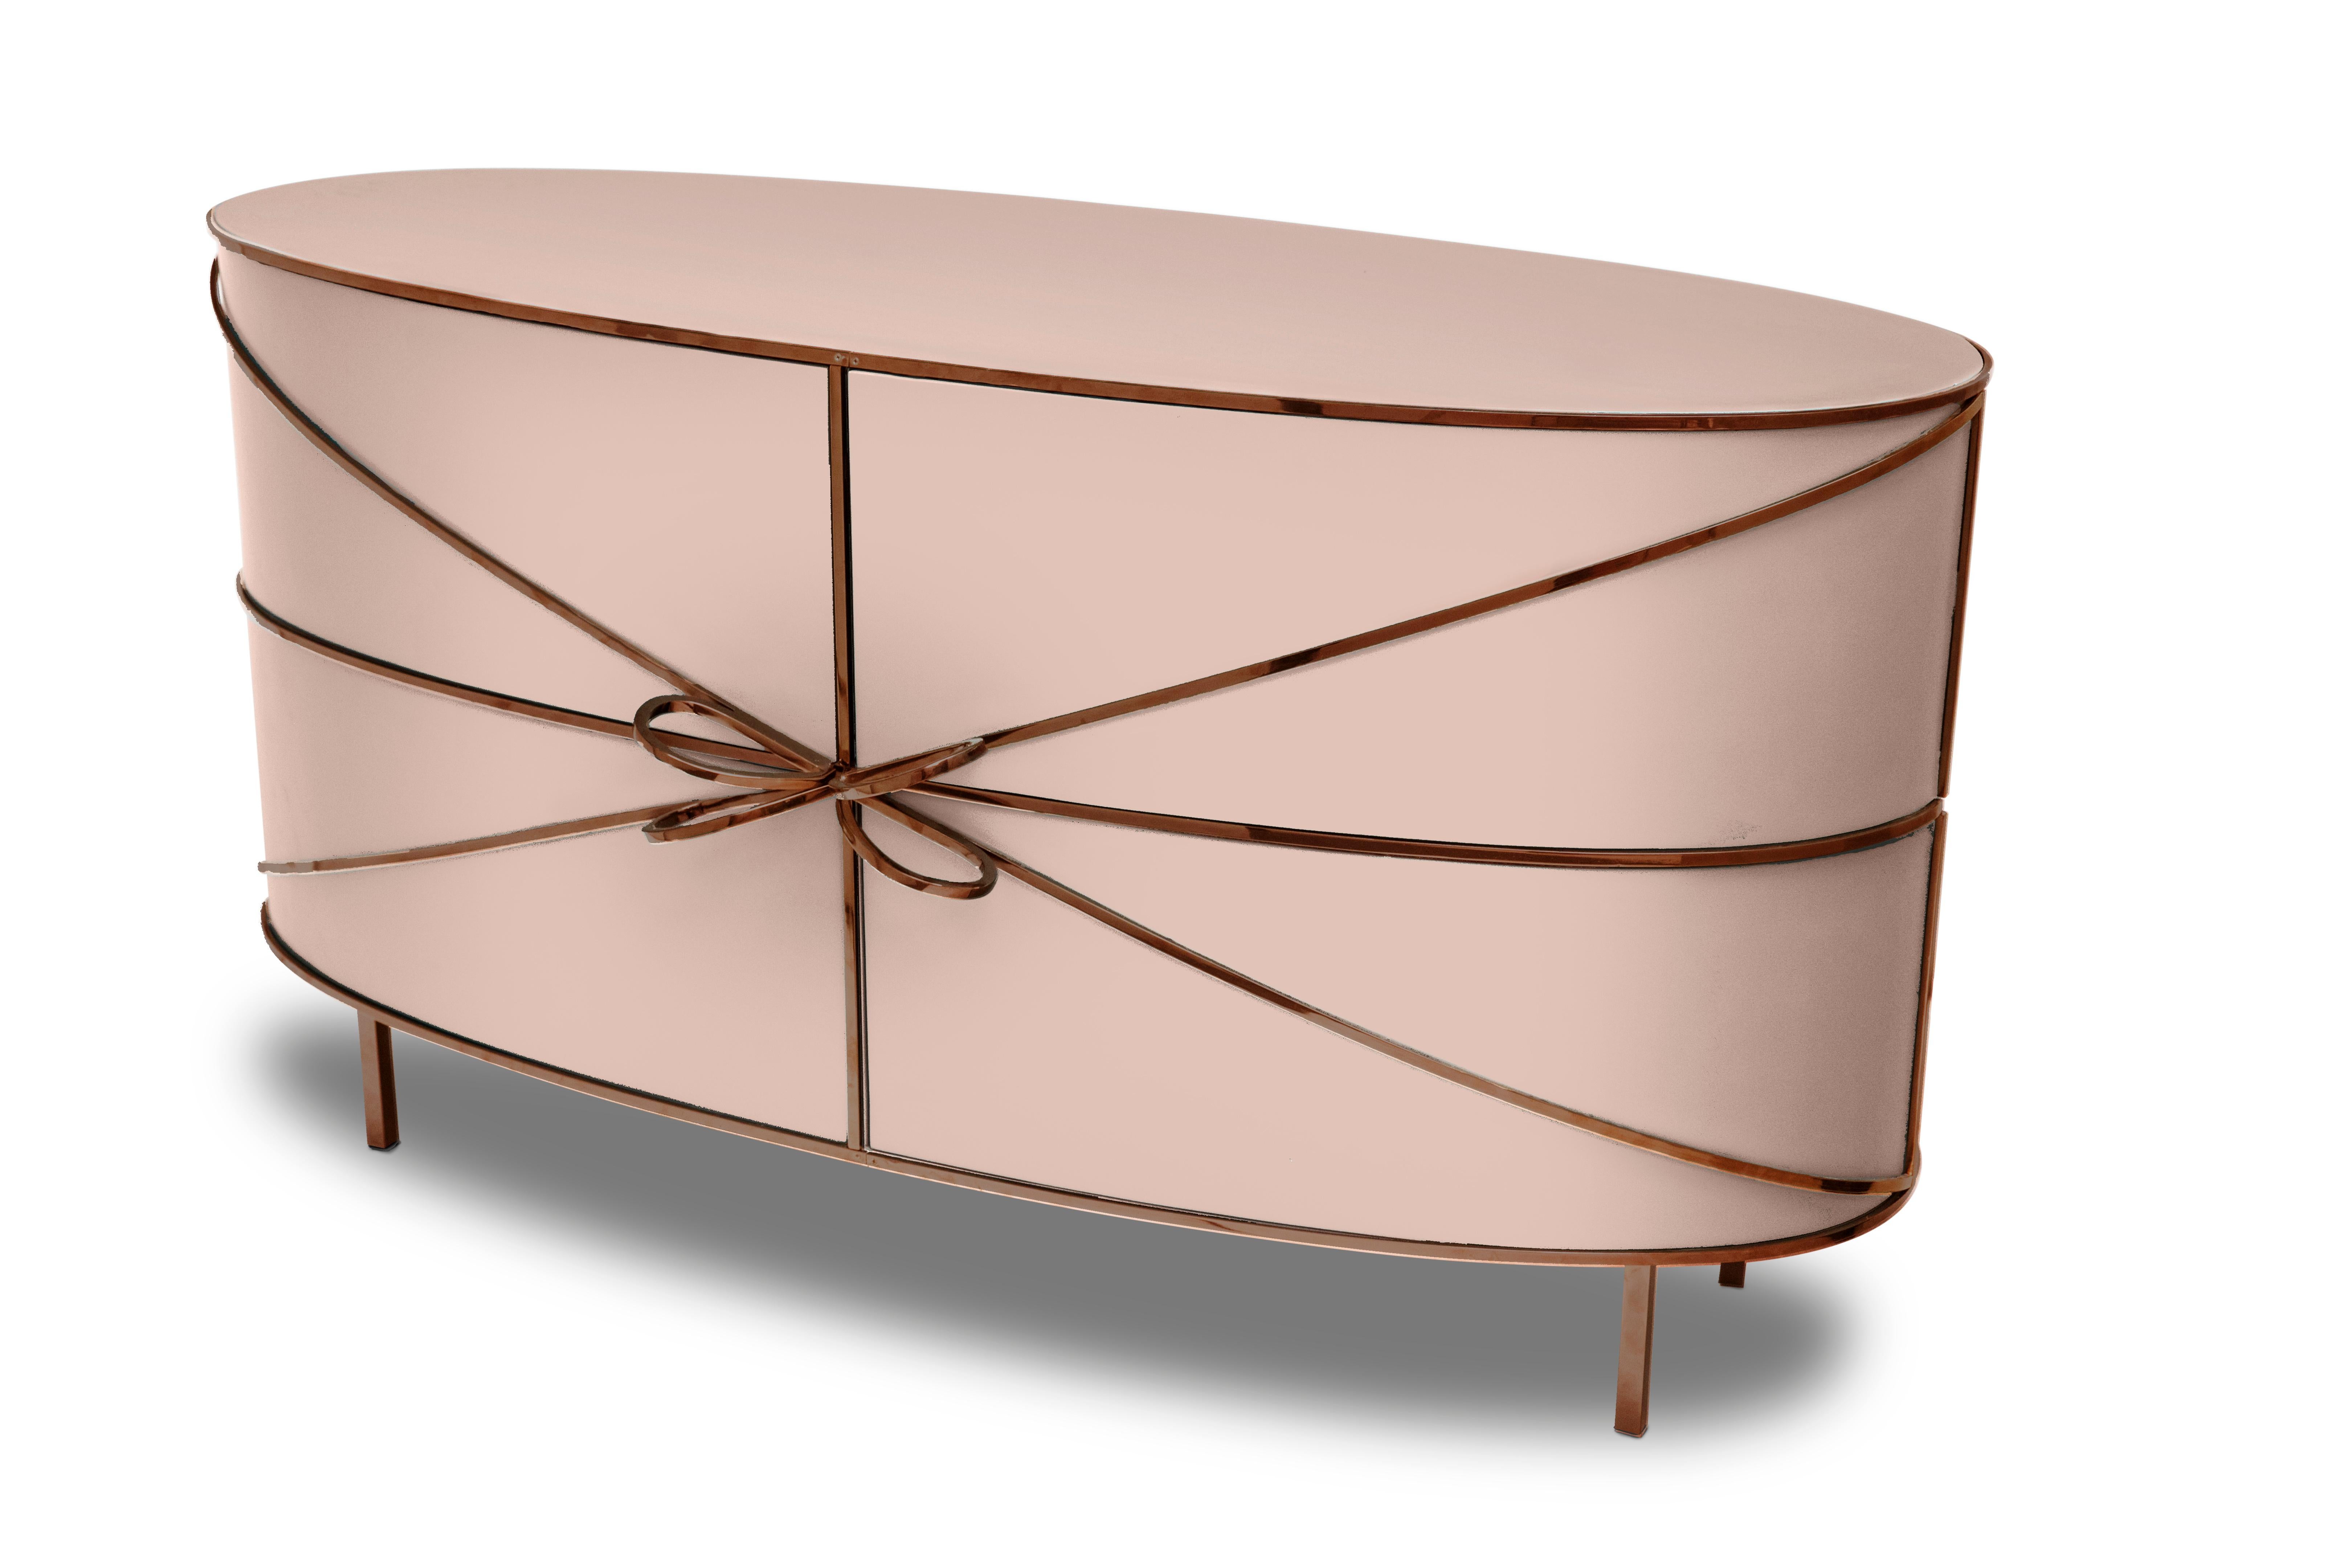 88 Secrets Pink Sideboard with Rose Gold Trims by Nika Zupanc is an elegant pink cabinet in sensuous, feminine lines with luxurious metal trims in rose gold. A statement piece in any interior space!

Nika Zupanc, a strikingly renowned Slovenian